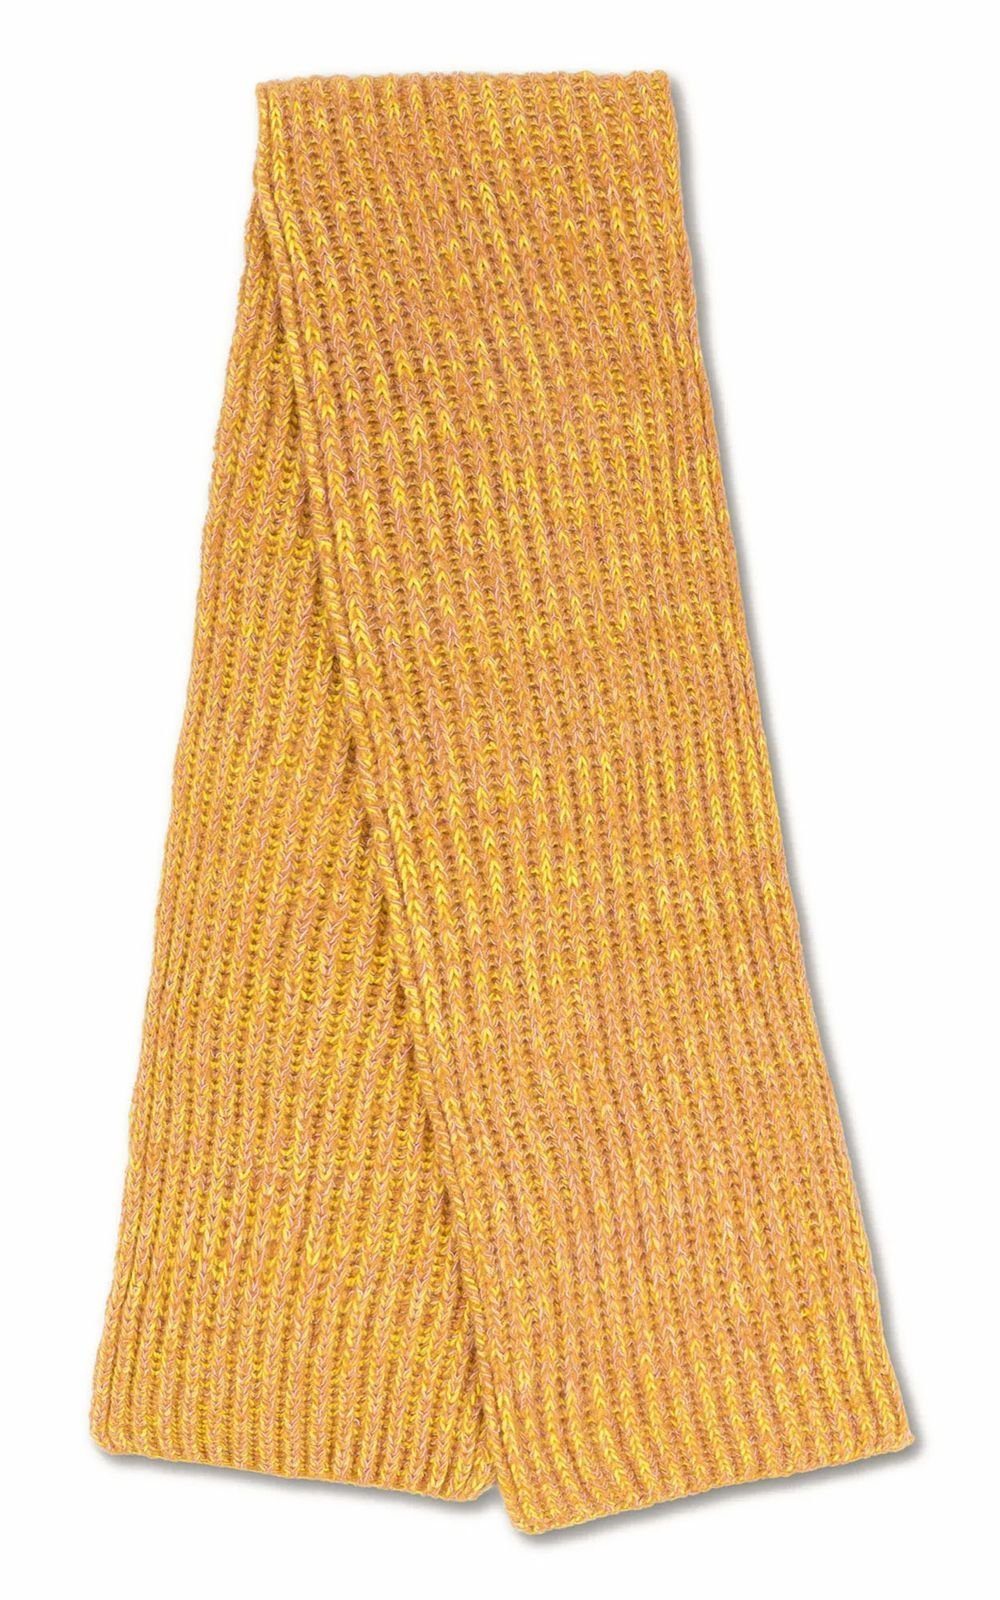 Yellow Oilily Safety Modeschal Tweed